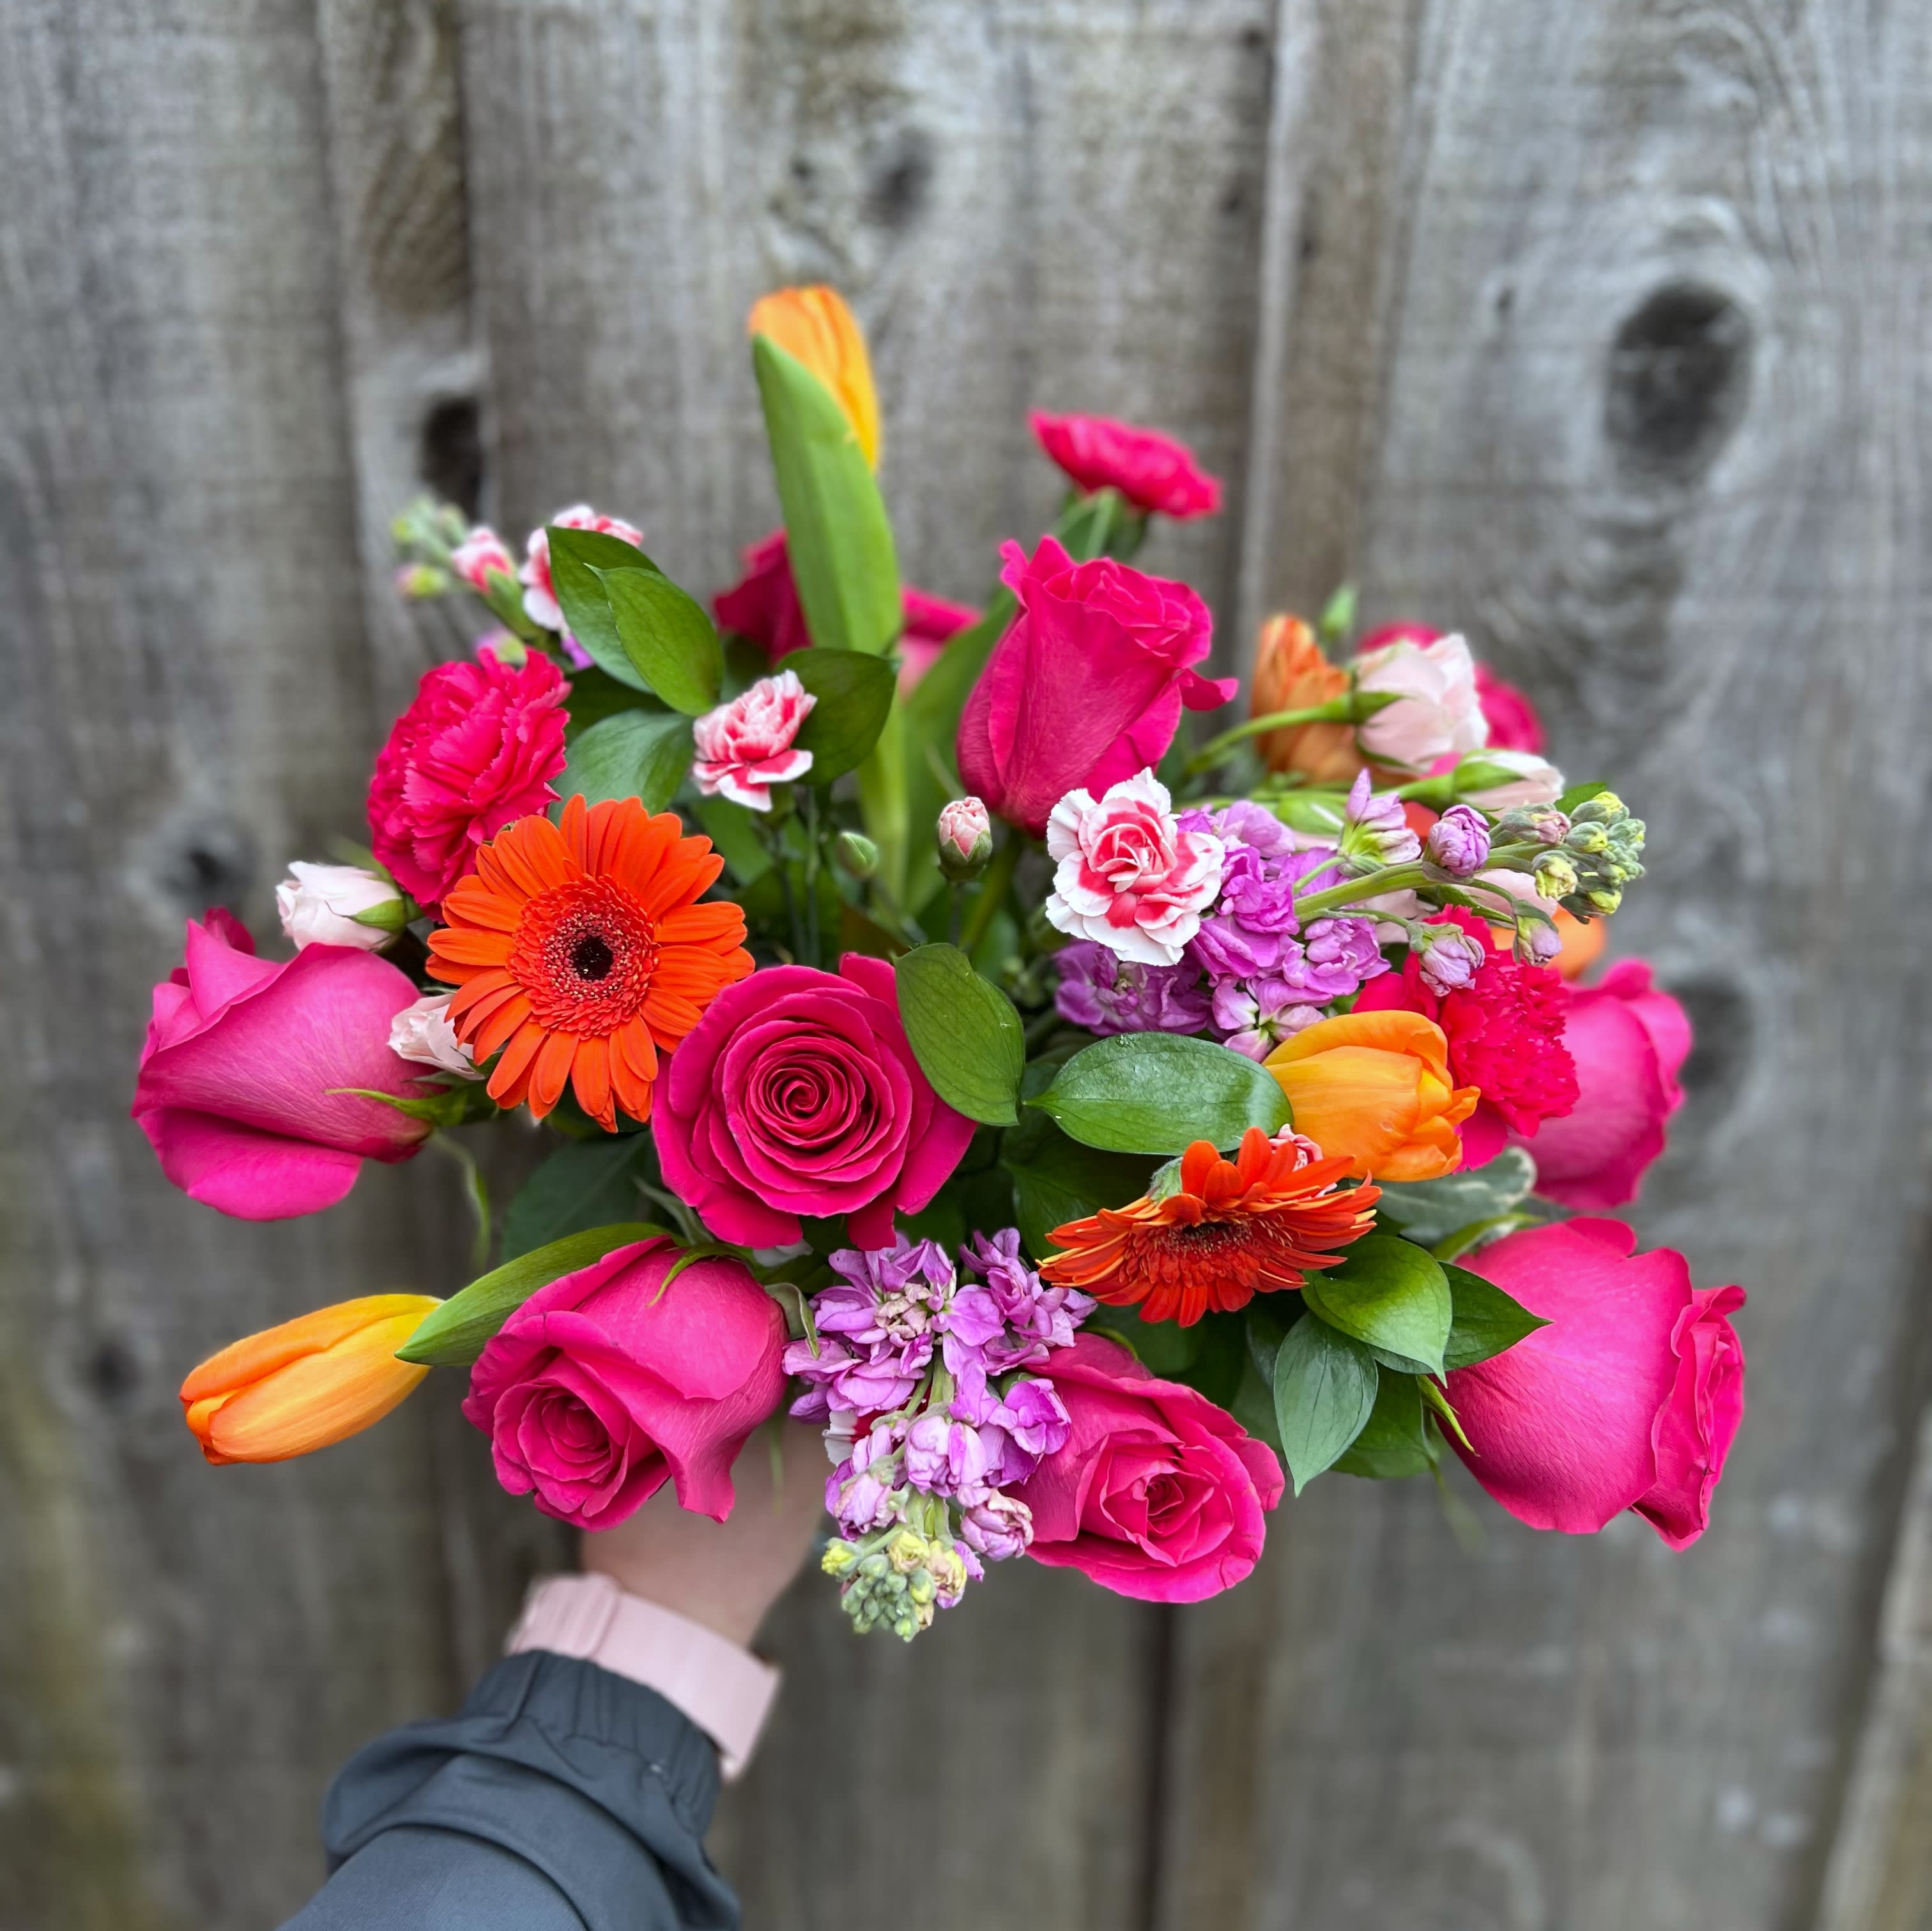 Fiesta Bouquet - Bright arrangement of hot pink and orange florals arranged carefully in a cylinder vase. Design varies upon availability and sizing. Premium product is shown. The actual product may differ slightly to the photo but will match its size and theme.